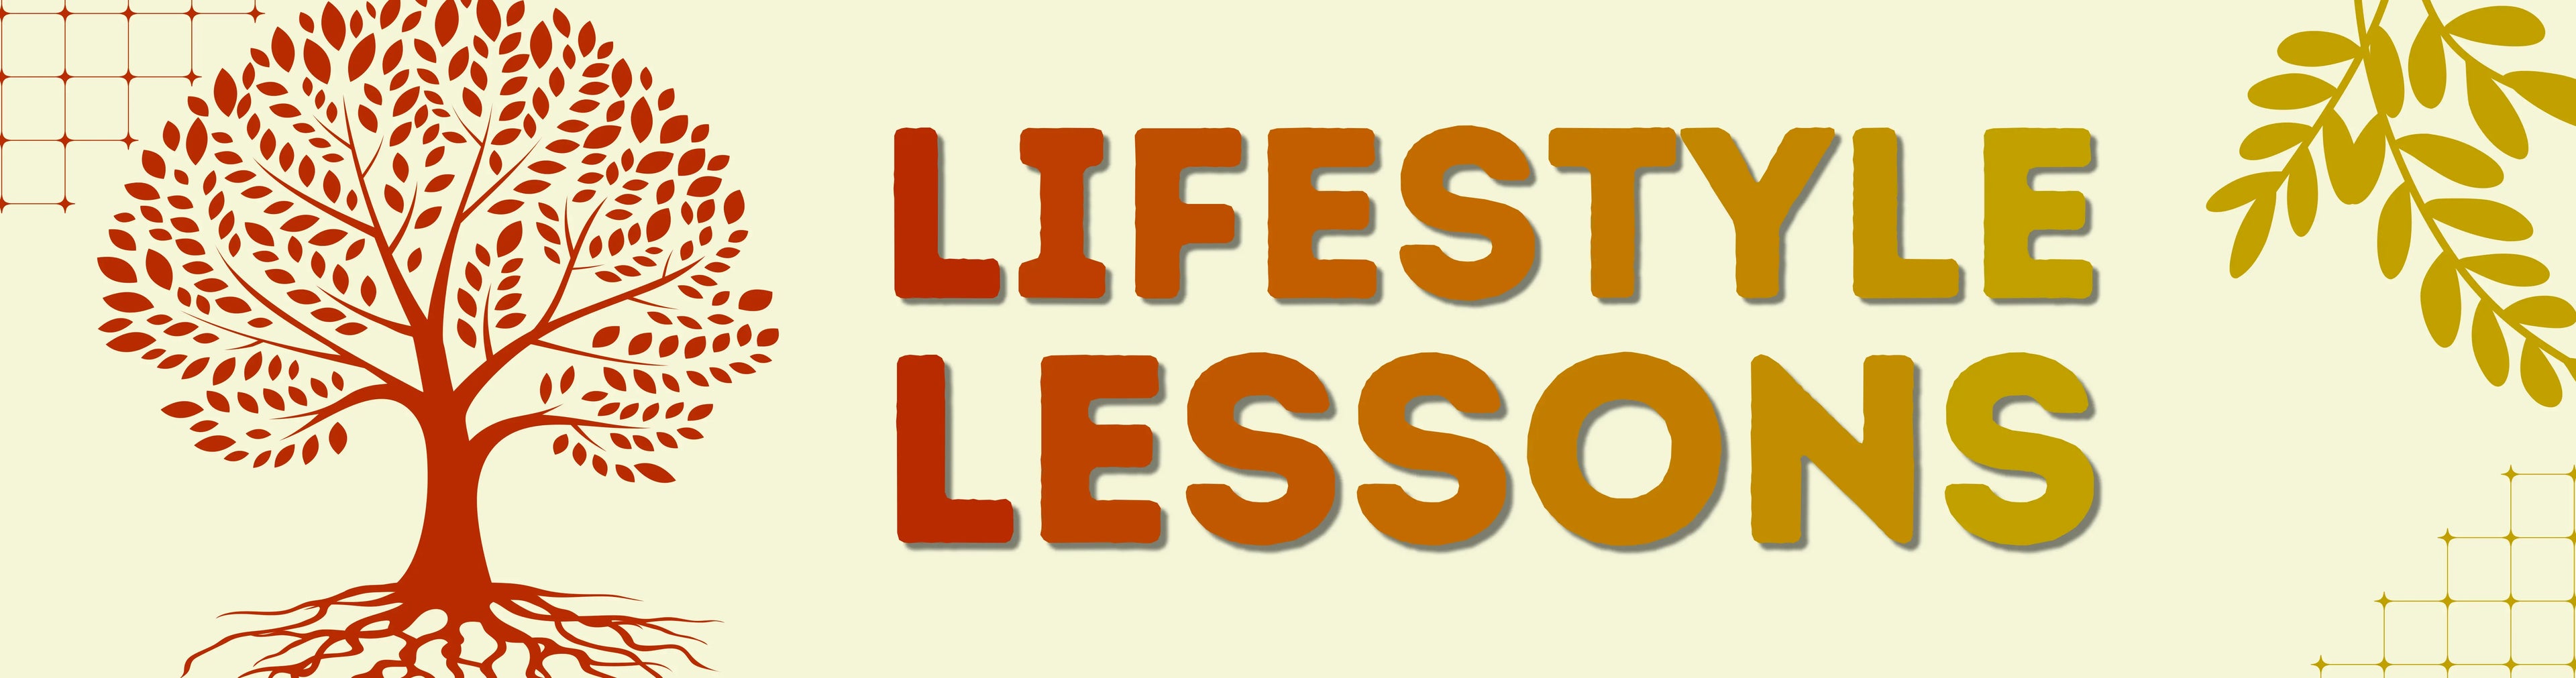 Lifestyle Lessons Blog Banner - Woodwell Supplements